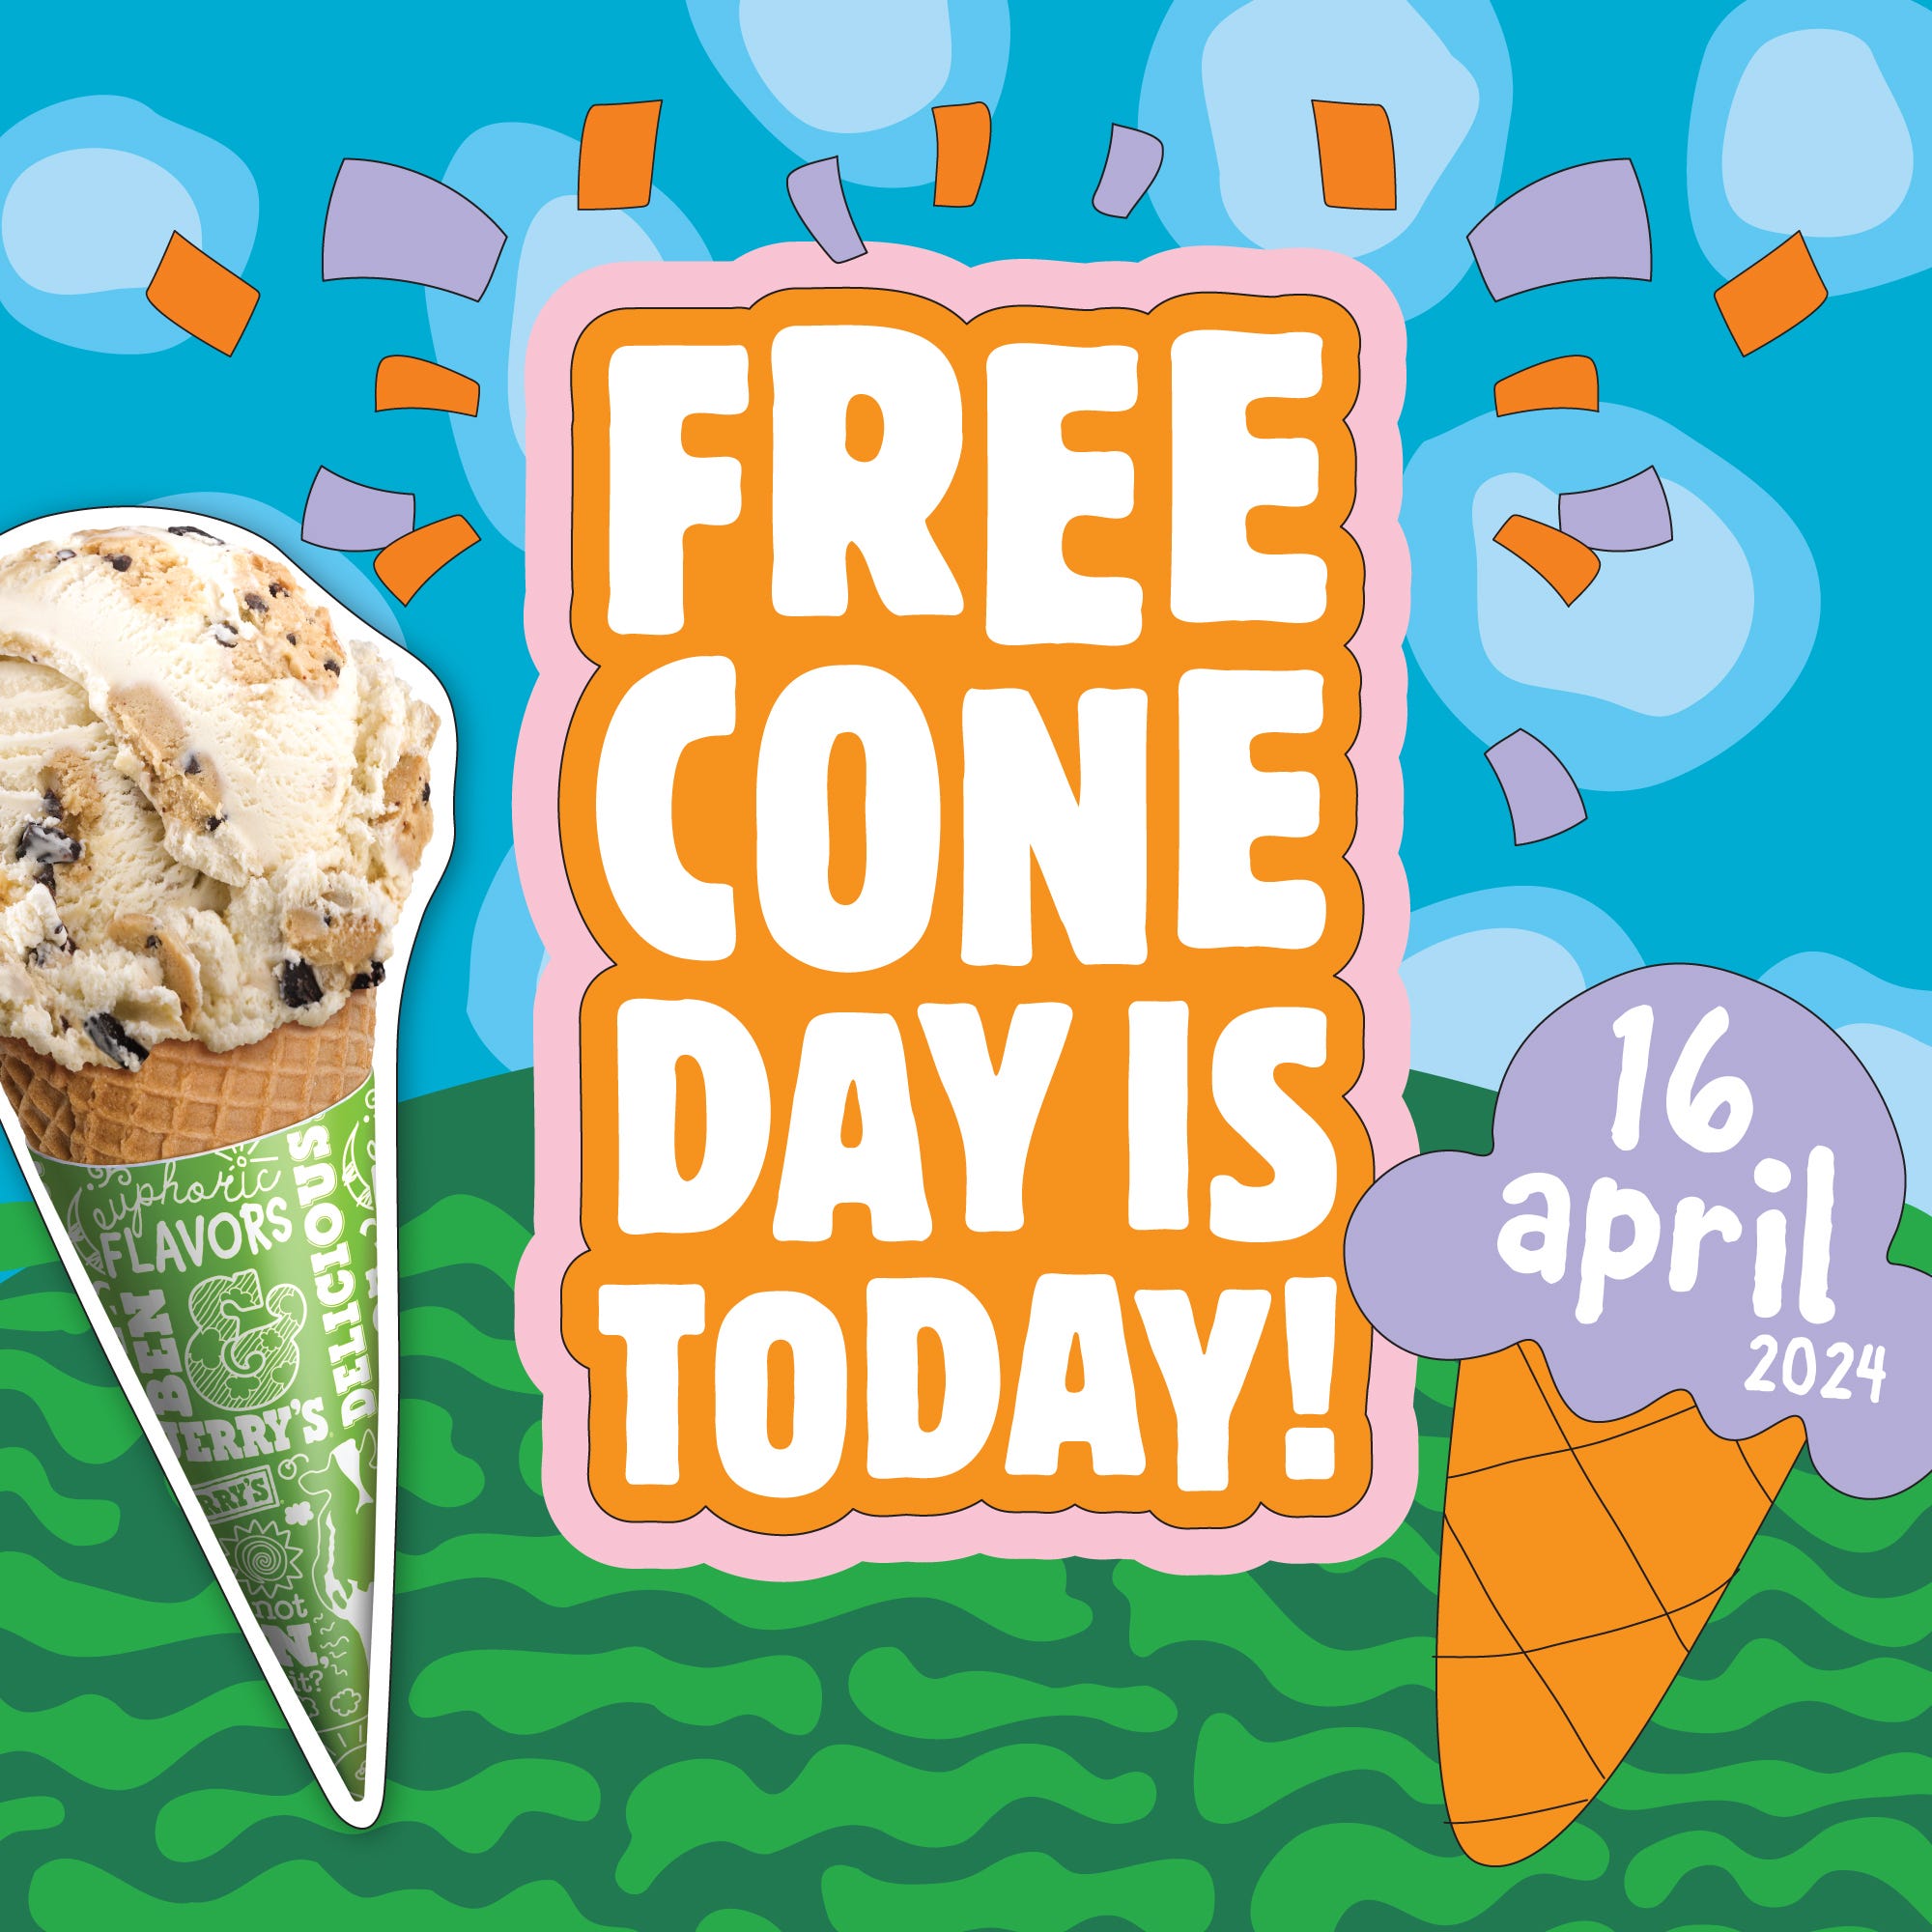 how to, ben & jerry's free cone day is back: how to get free ice cream at shops tuesday